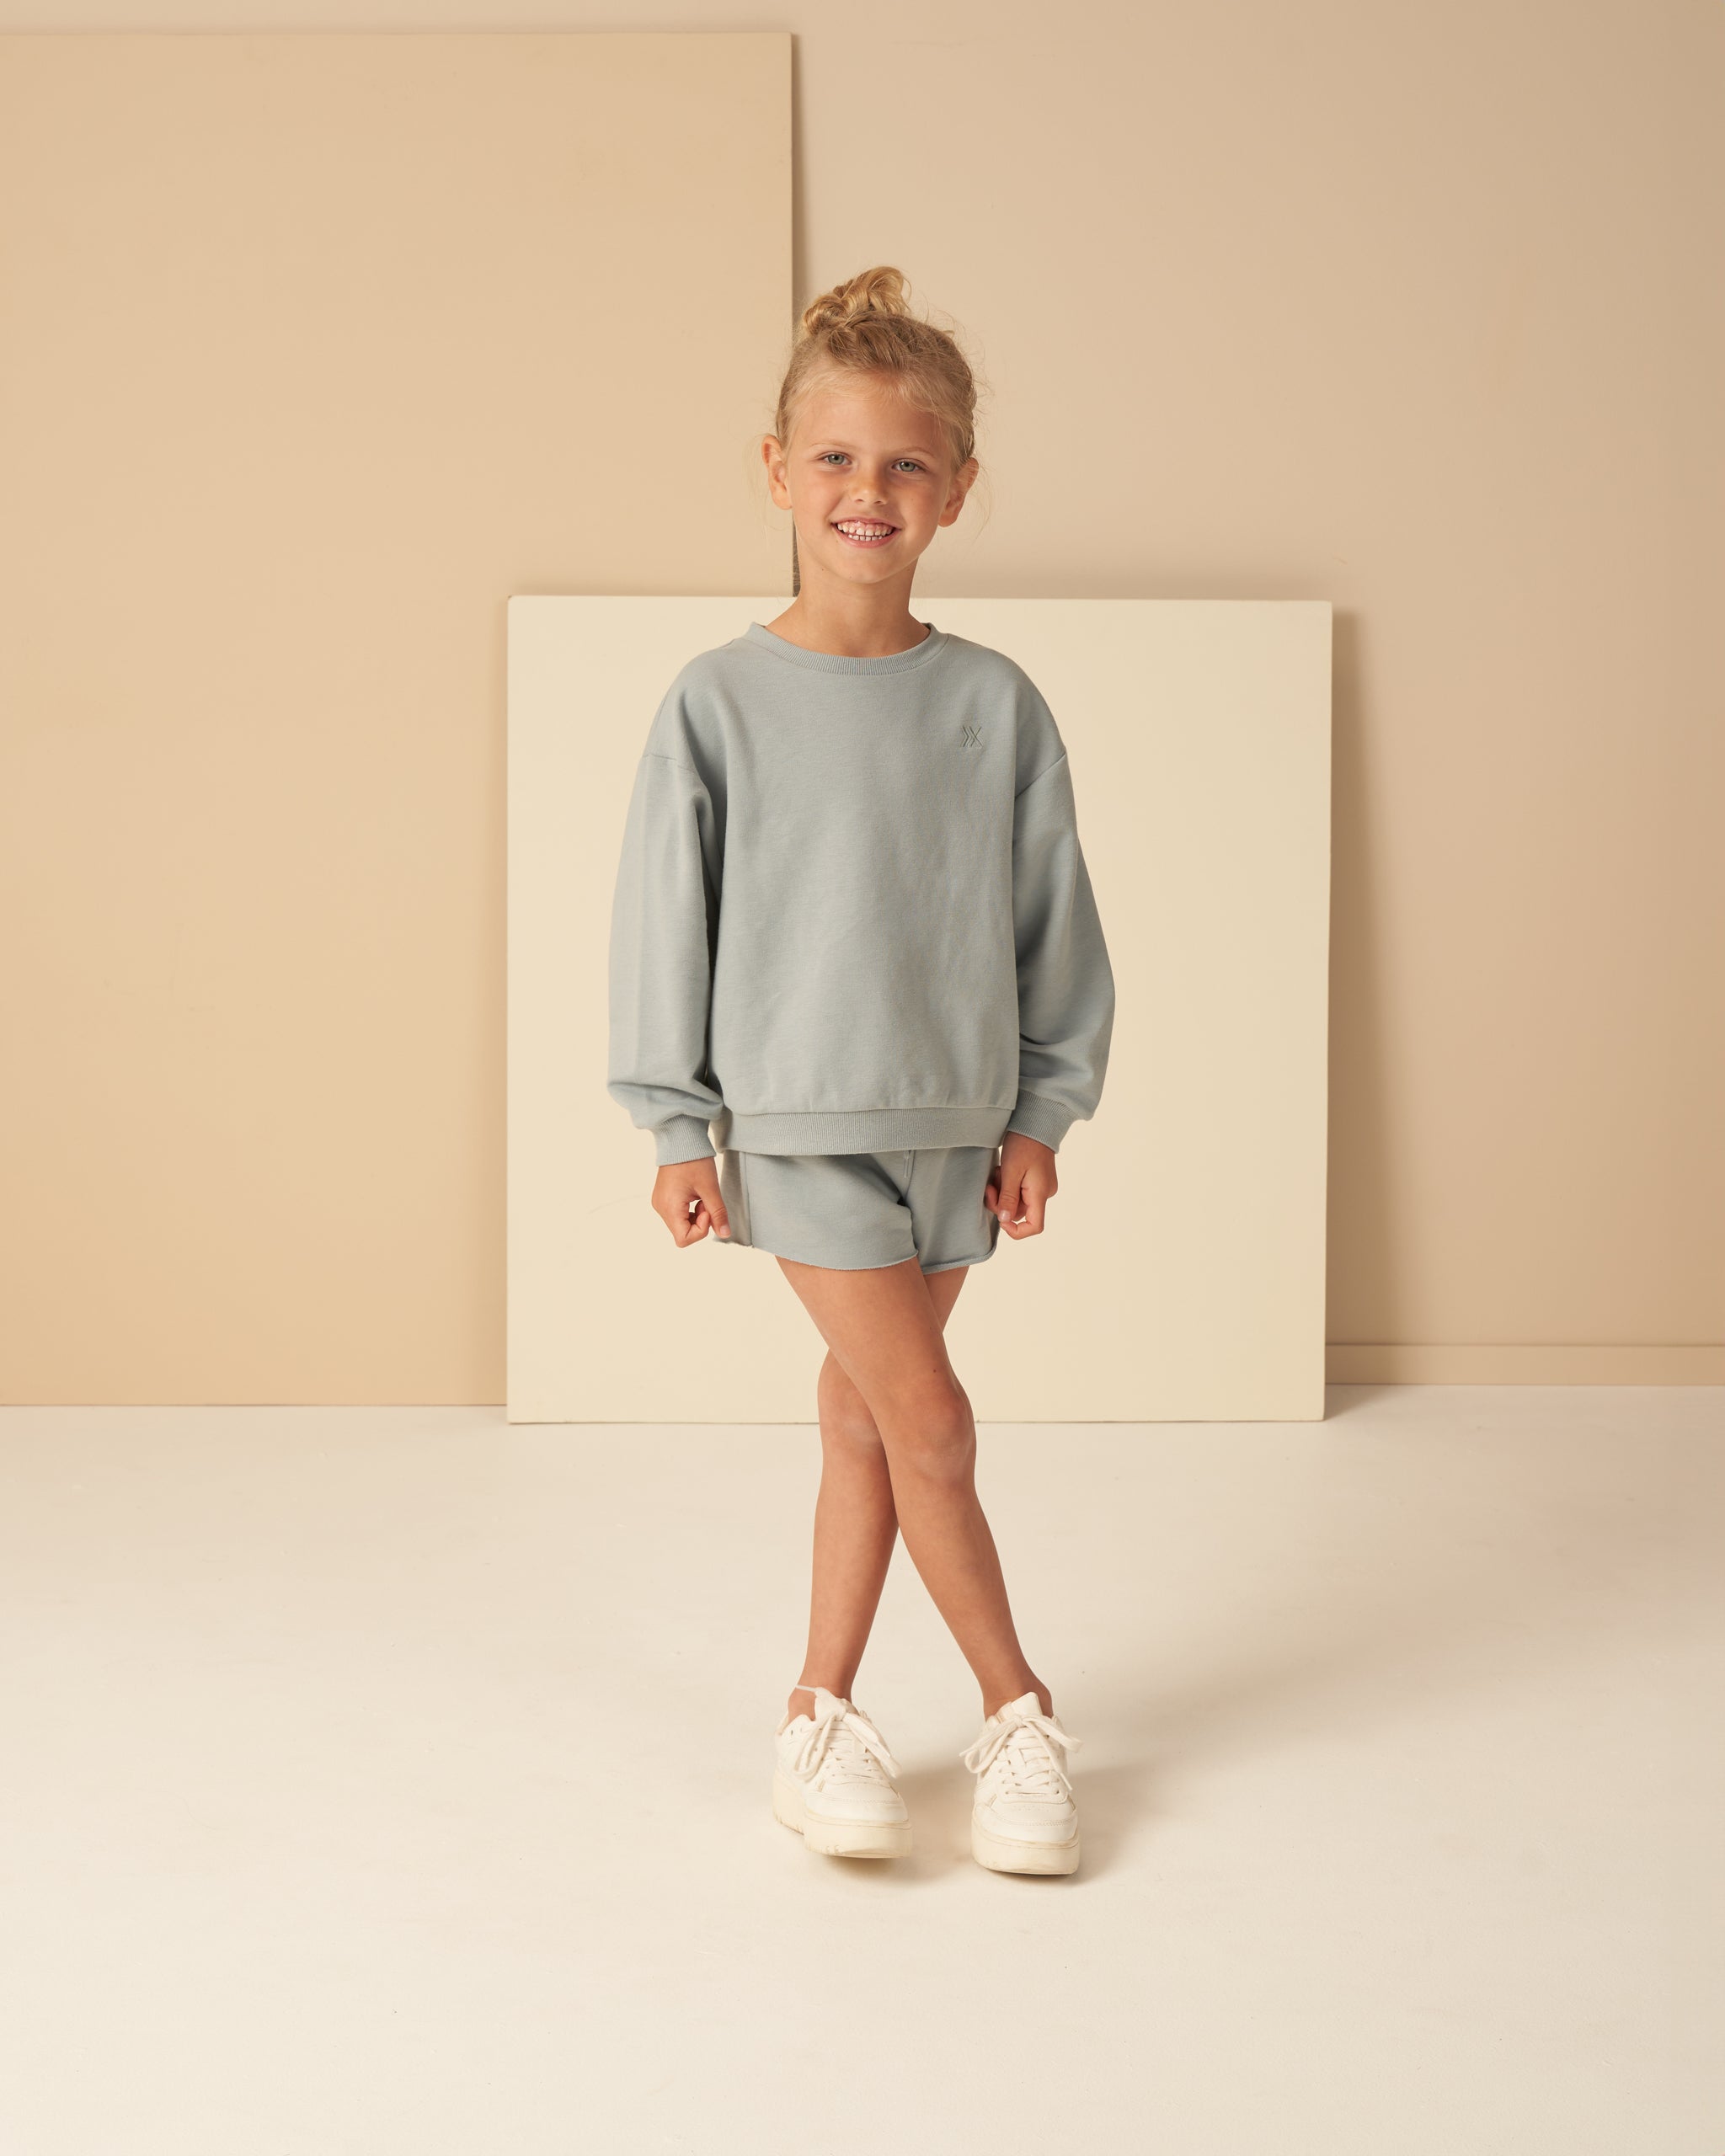 Sweat Short || Blue - Rylee + Cru | Kids Clothes | Trendy Baby Clothes | Modern Infant Outfits |